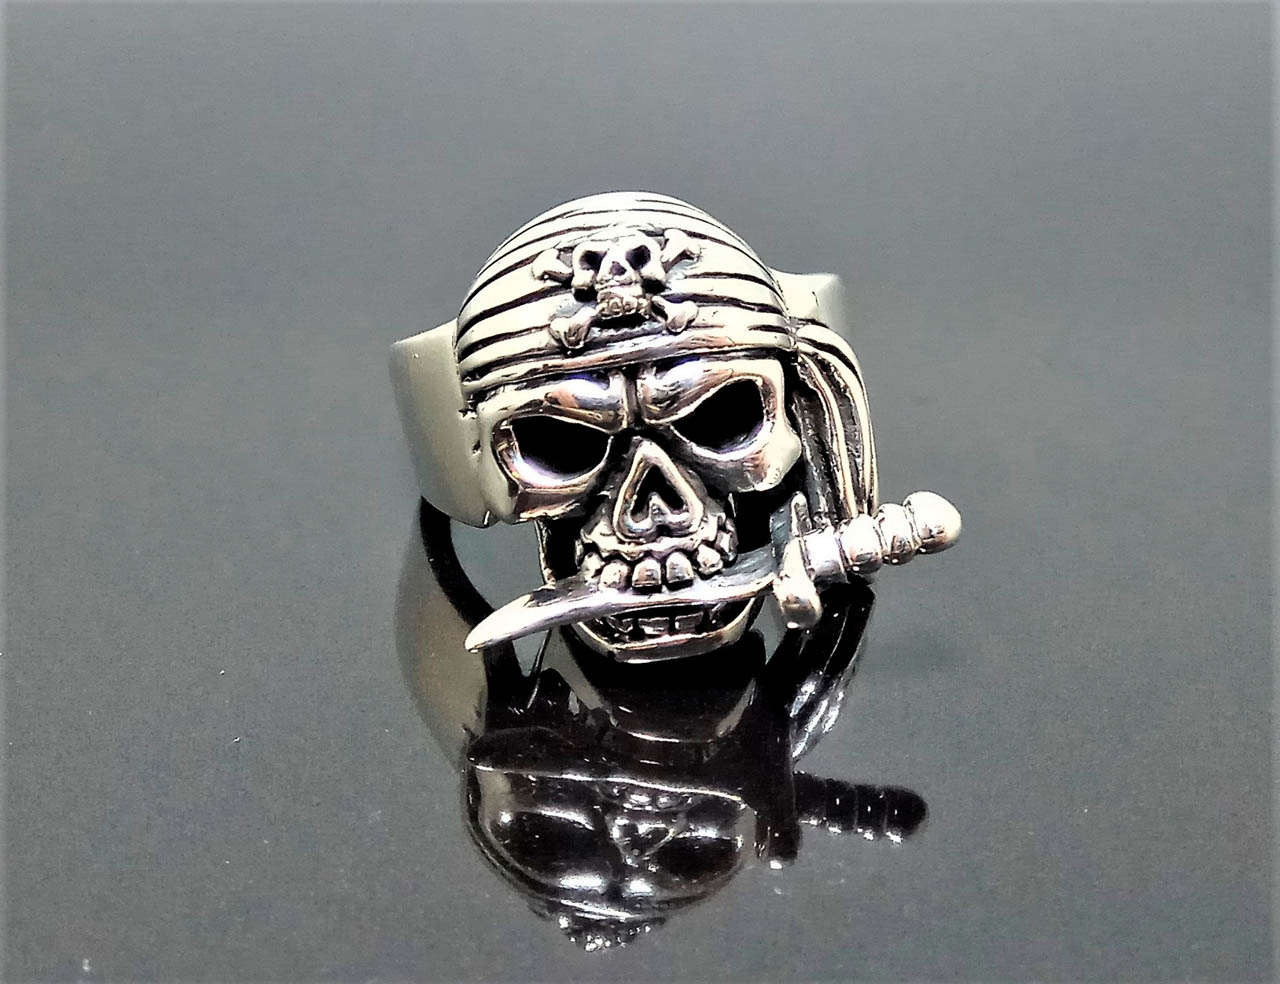 Gems Pirate Exclusive Jewelry ELIZ with Silver - 18 and Biker Pirate Ring Knife Grams Heavy 925 Sterling goth rocker Design Skull